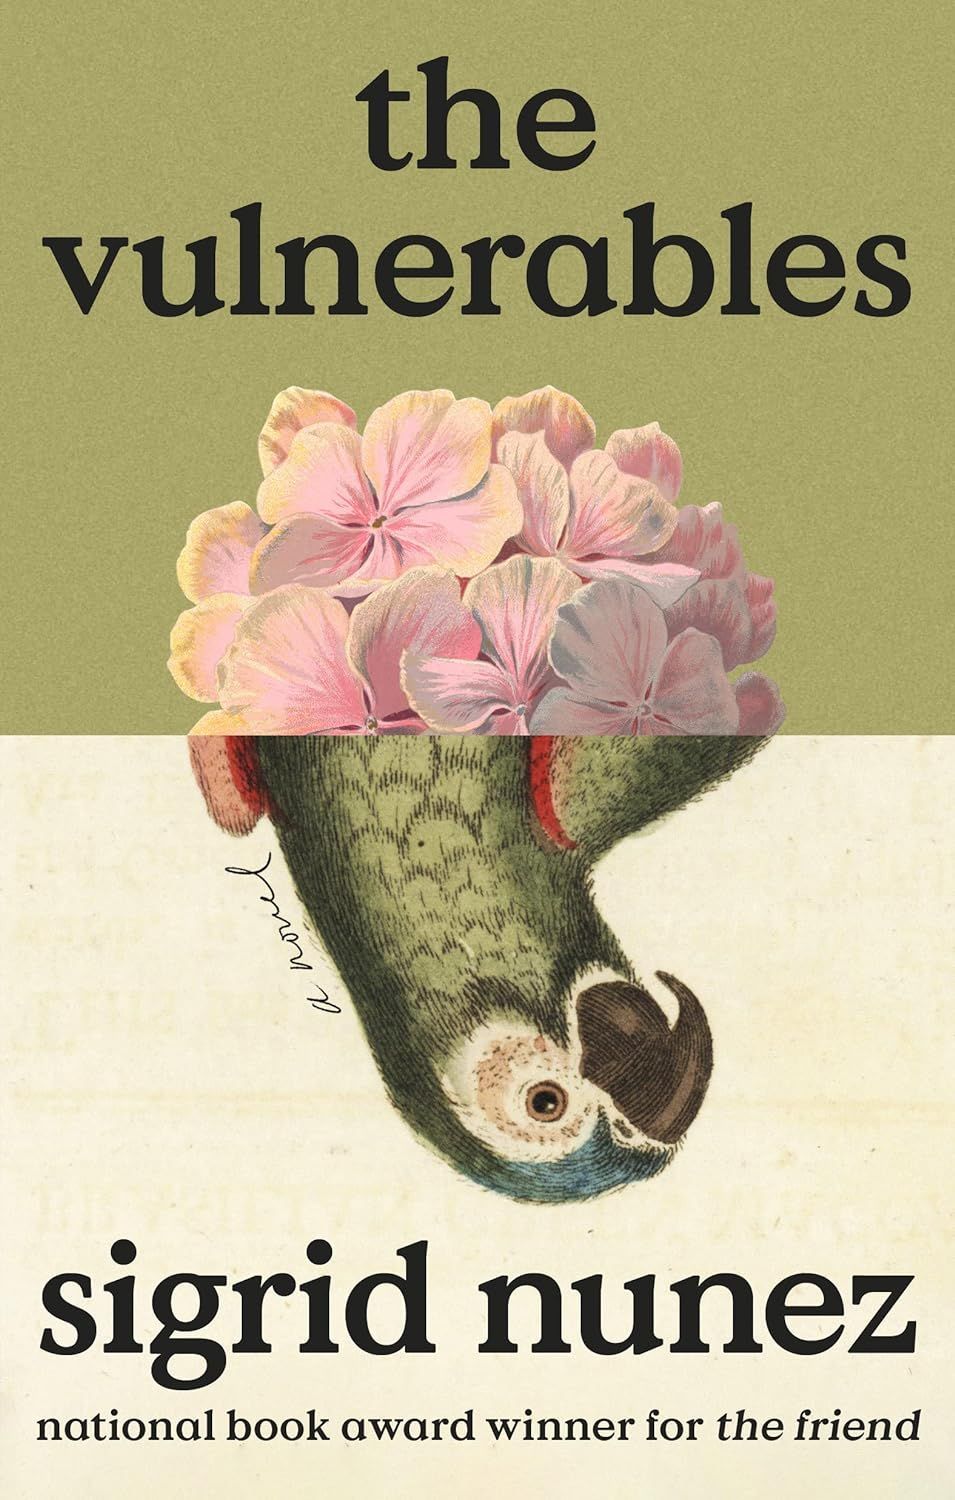 I Must Be Making It All Up: On Sigrid Nunez’s “The Vulnerables”